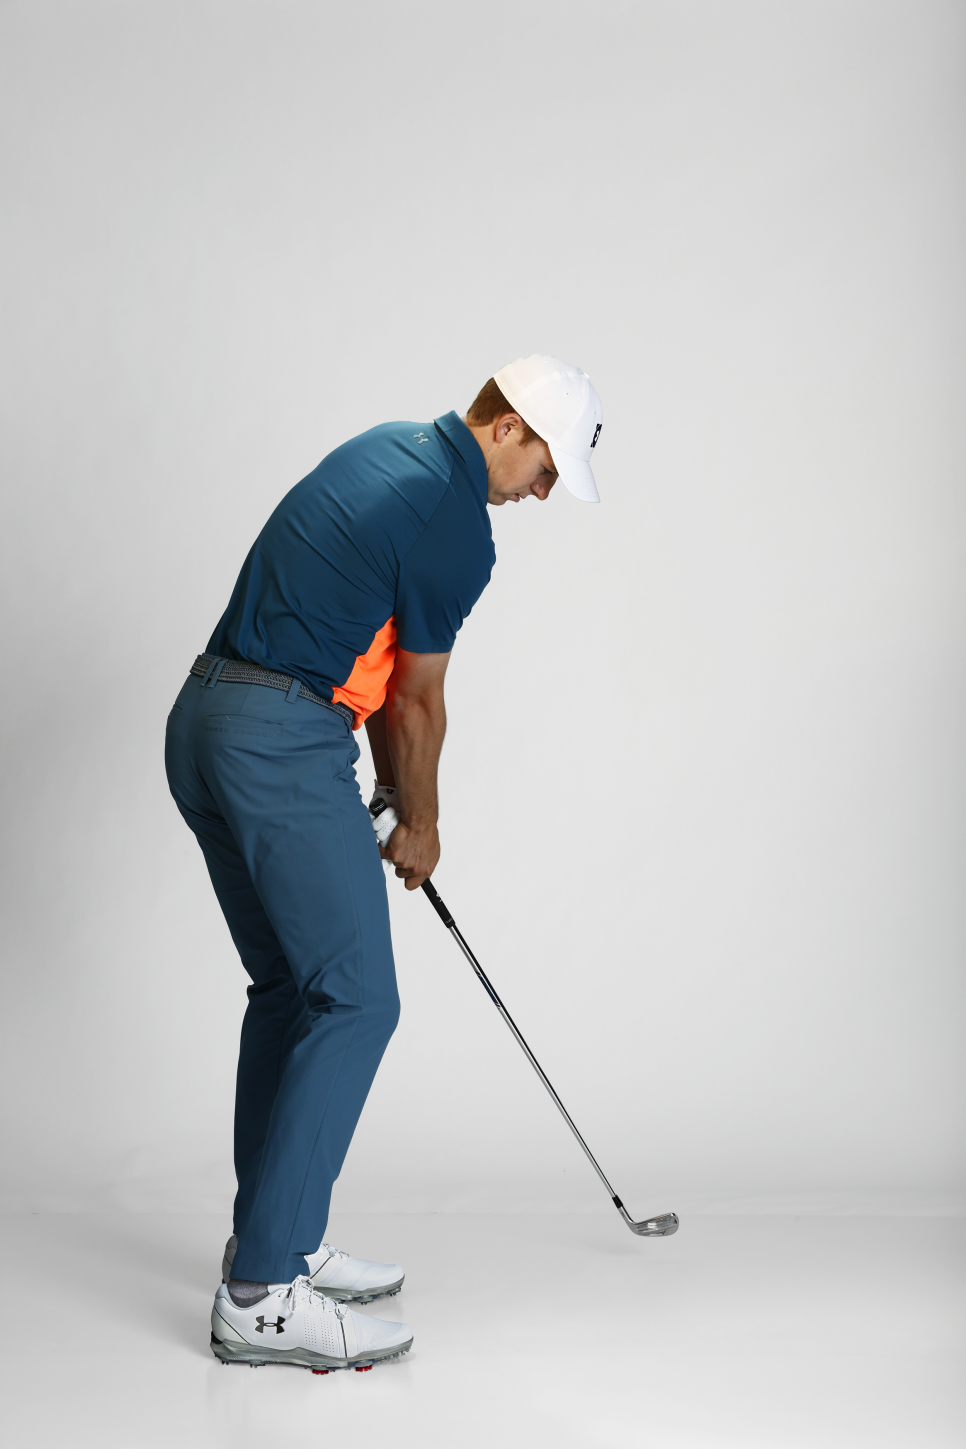 GD040119_INST_SPIETH2.png